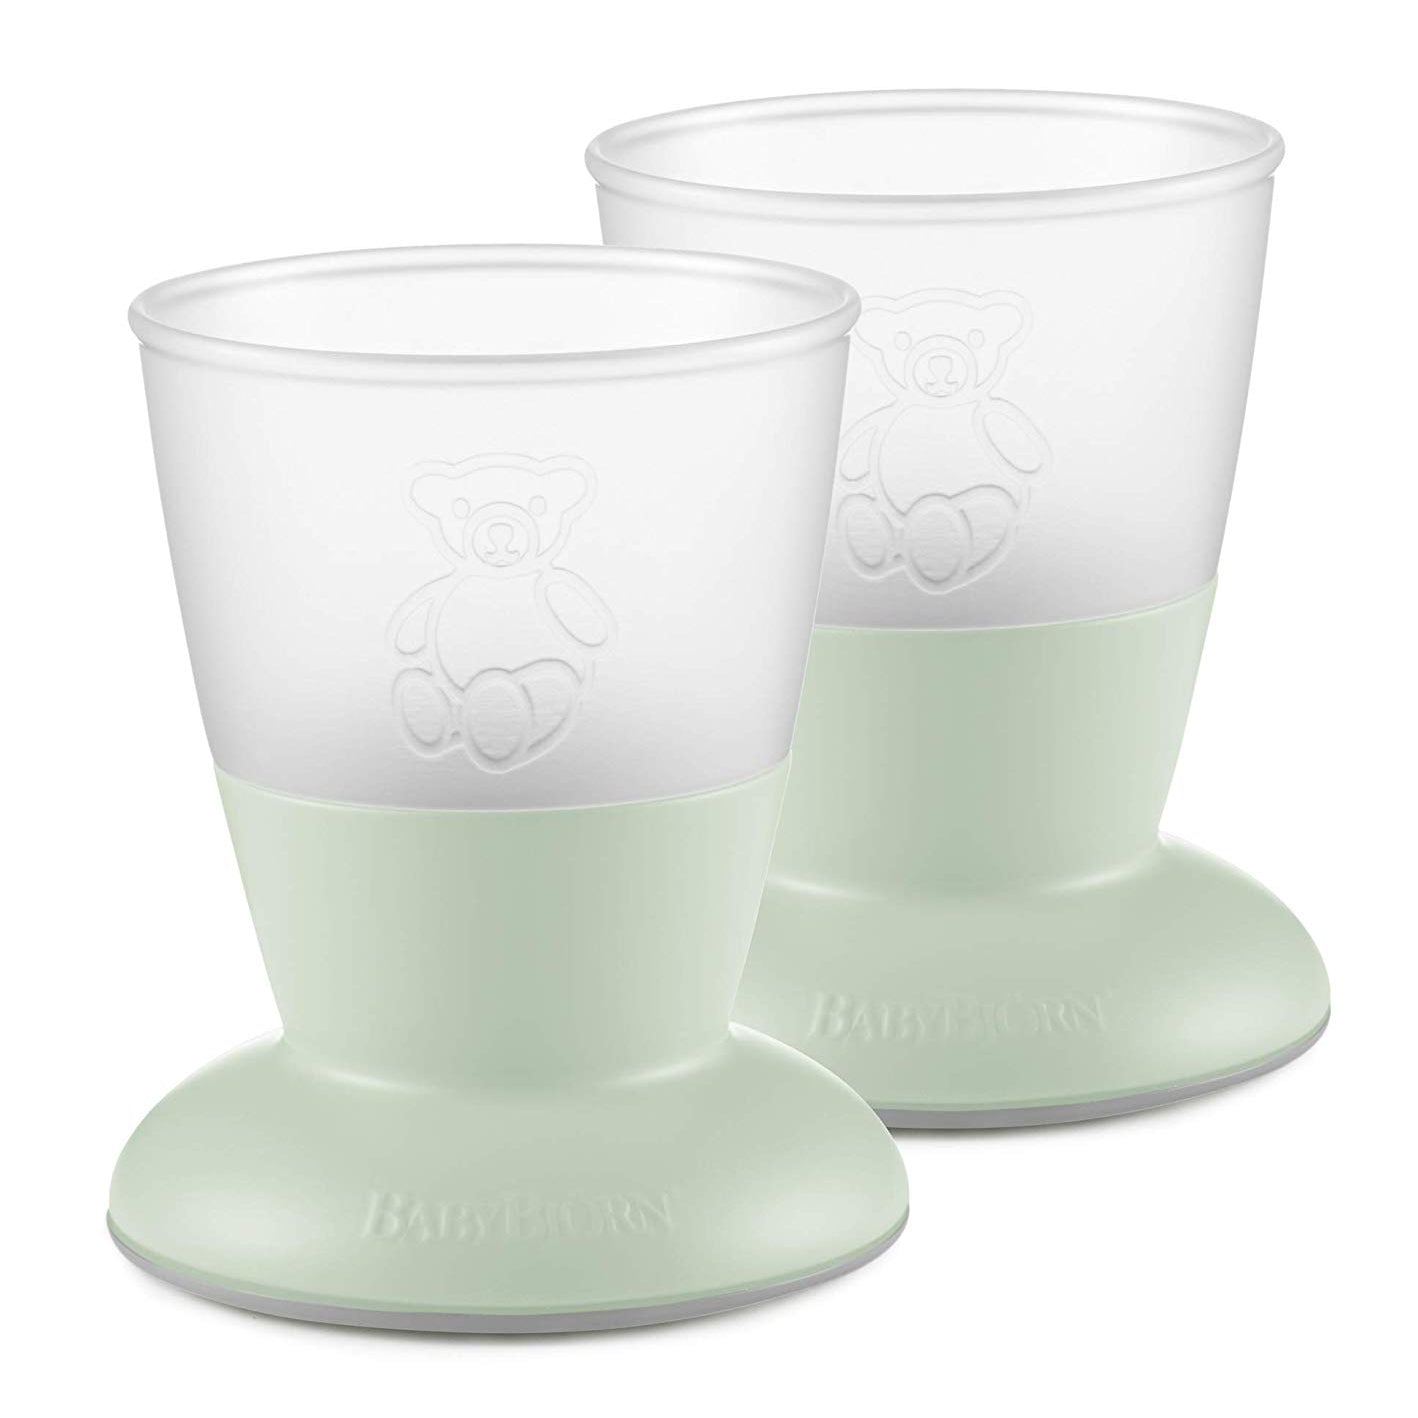 Baby Cup - 2 Pack